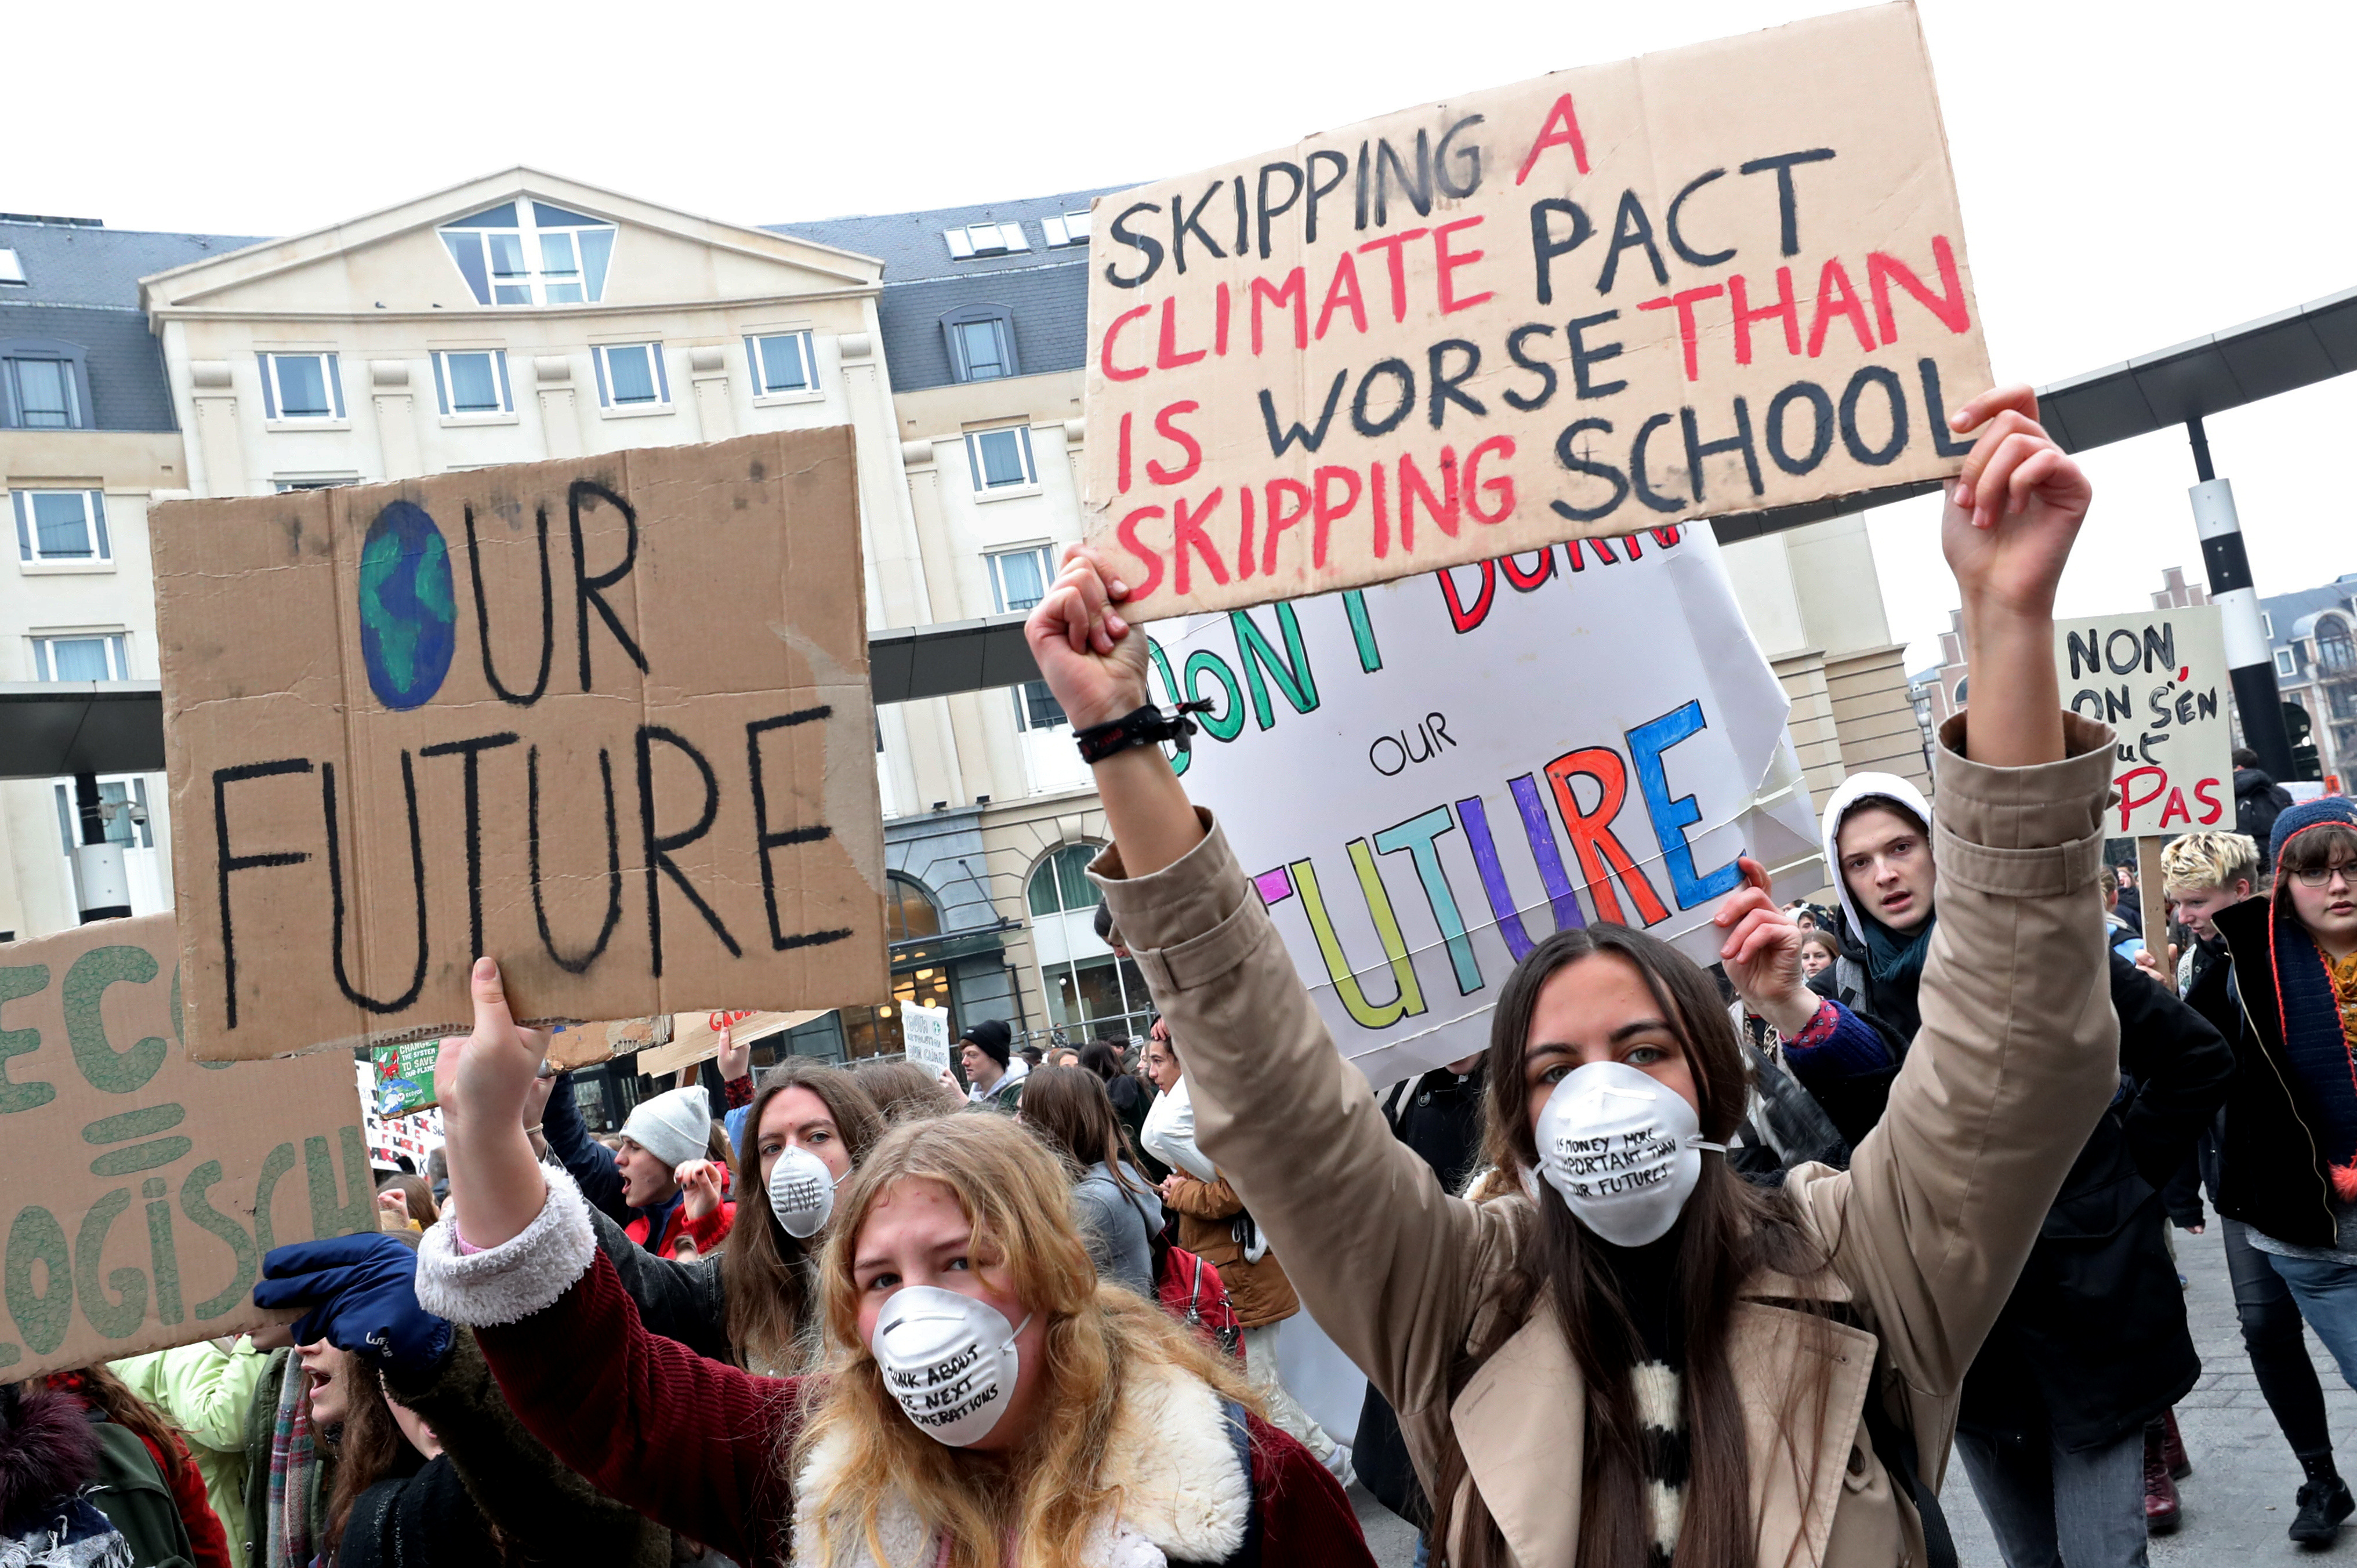 Belgian students claim for urgent measures to combat climate change during a demonstration in central Brussels